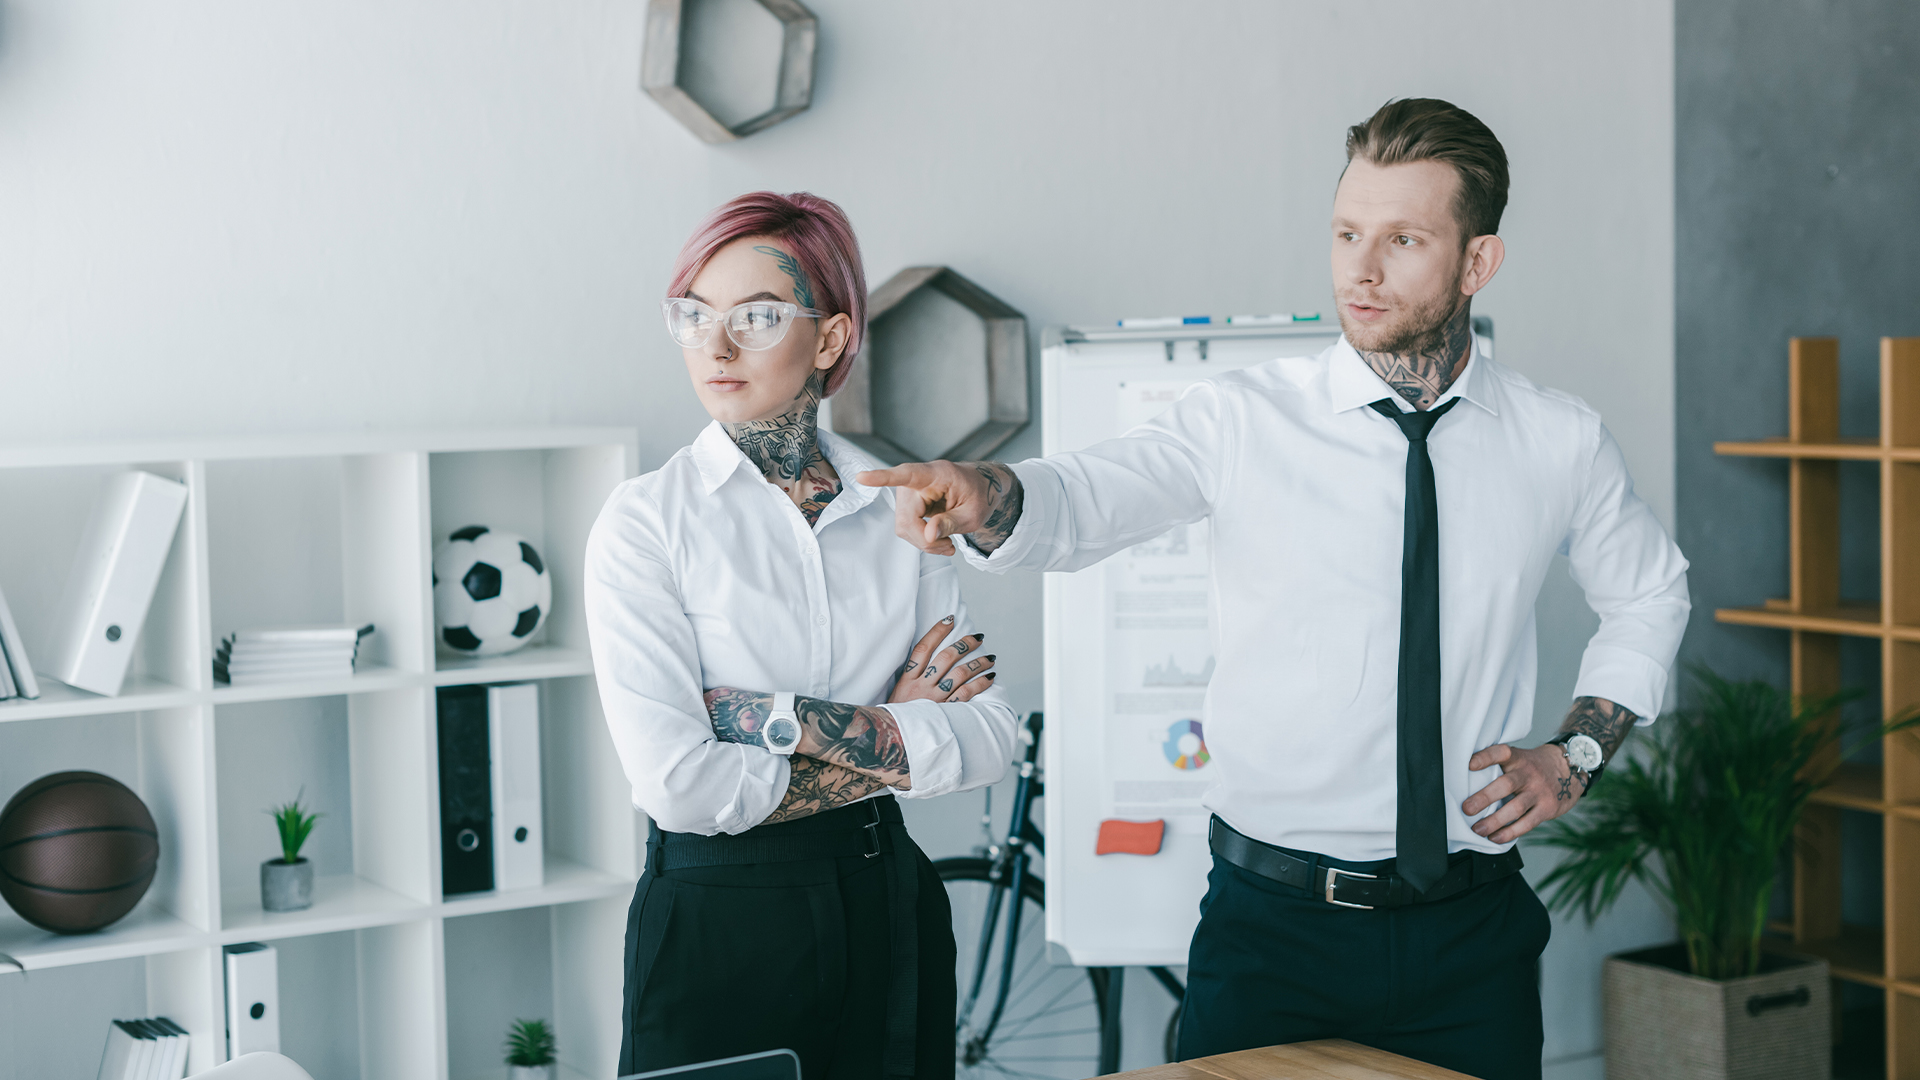 More Than Just Ink Are Tattoos in the Workplace More